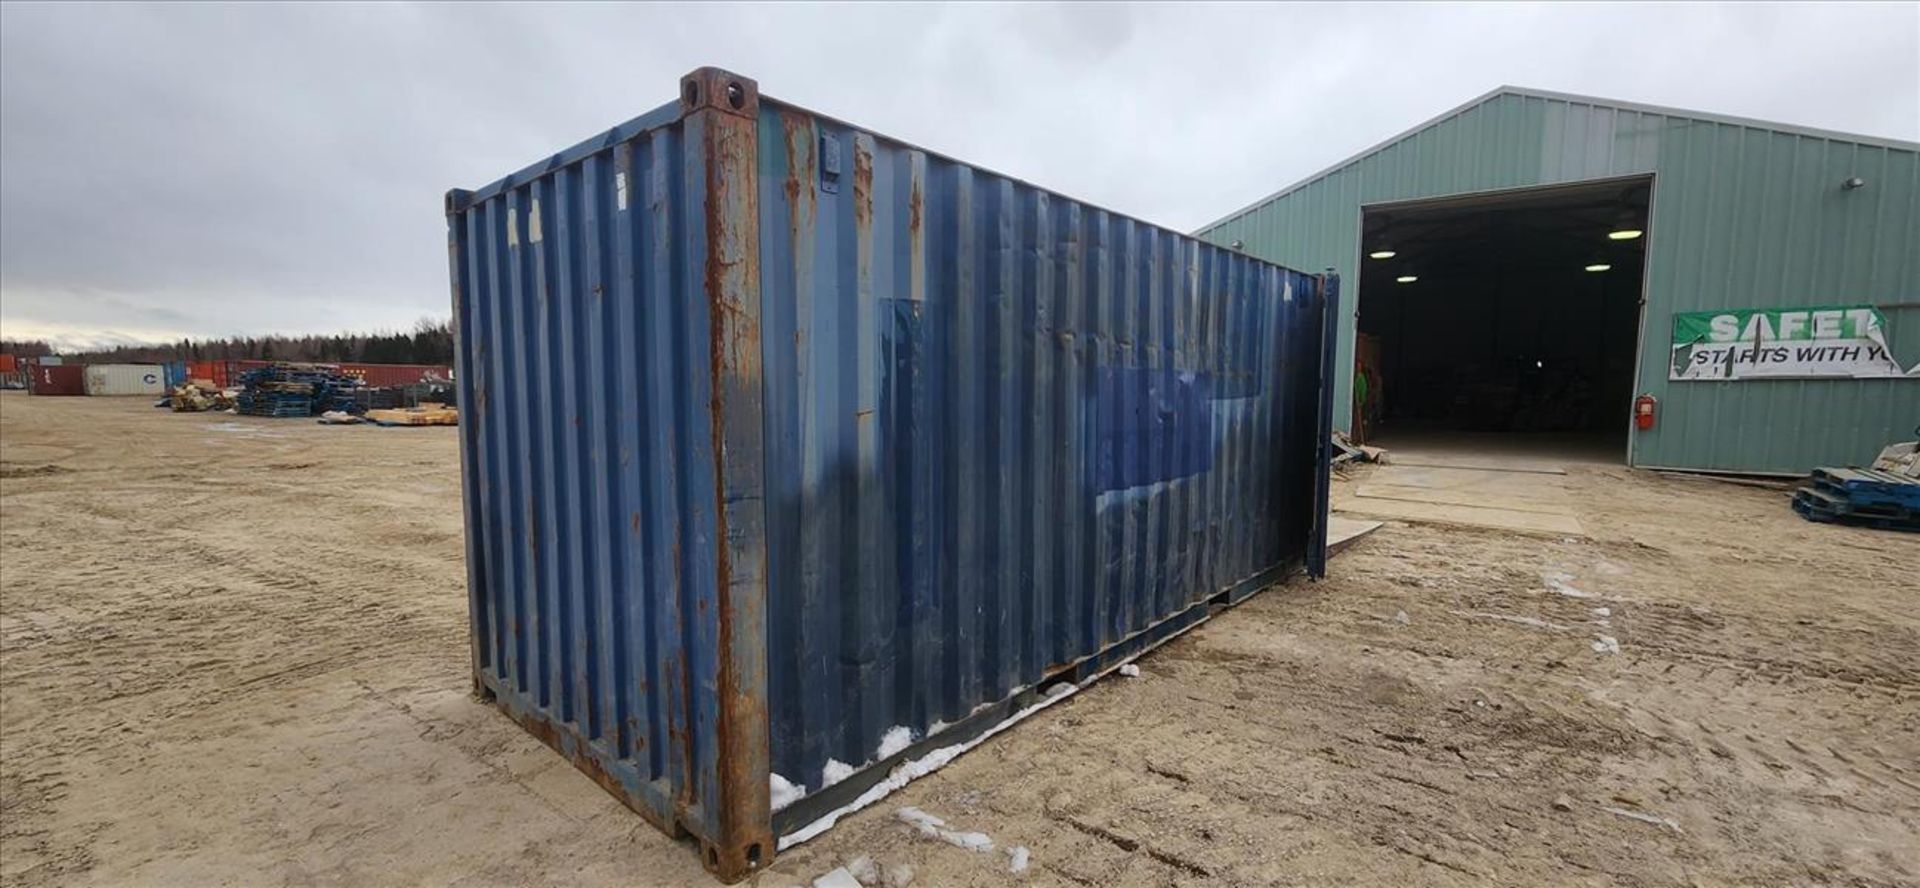 sea container, 20 ft. (delayed removal date applies) (Asset Location: Hallnor Yard) {Day 1} [TAG - Image 2 of 2